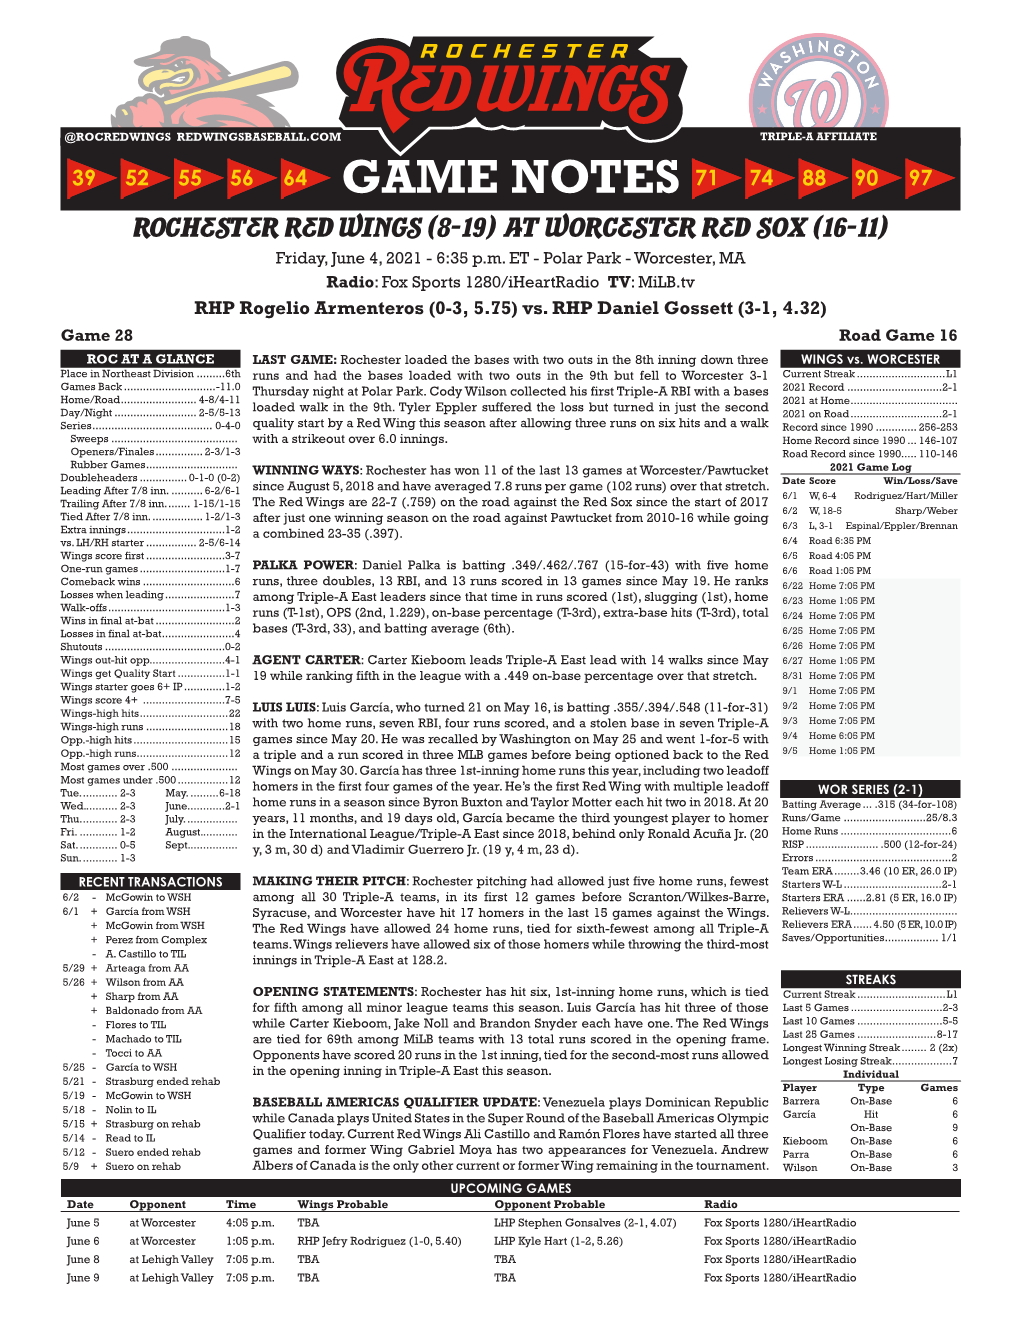 GAME NOTES Rochester Red Wings (8-19) at Worcester Red Sox (16-11) Friday, June 4, 2021 - 6:35 P.M